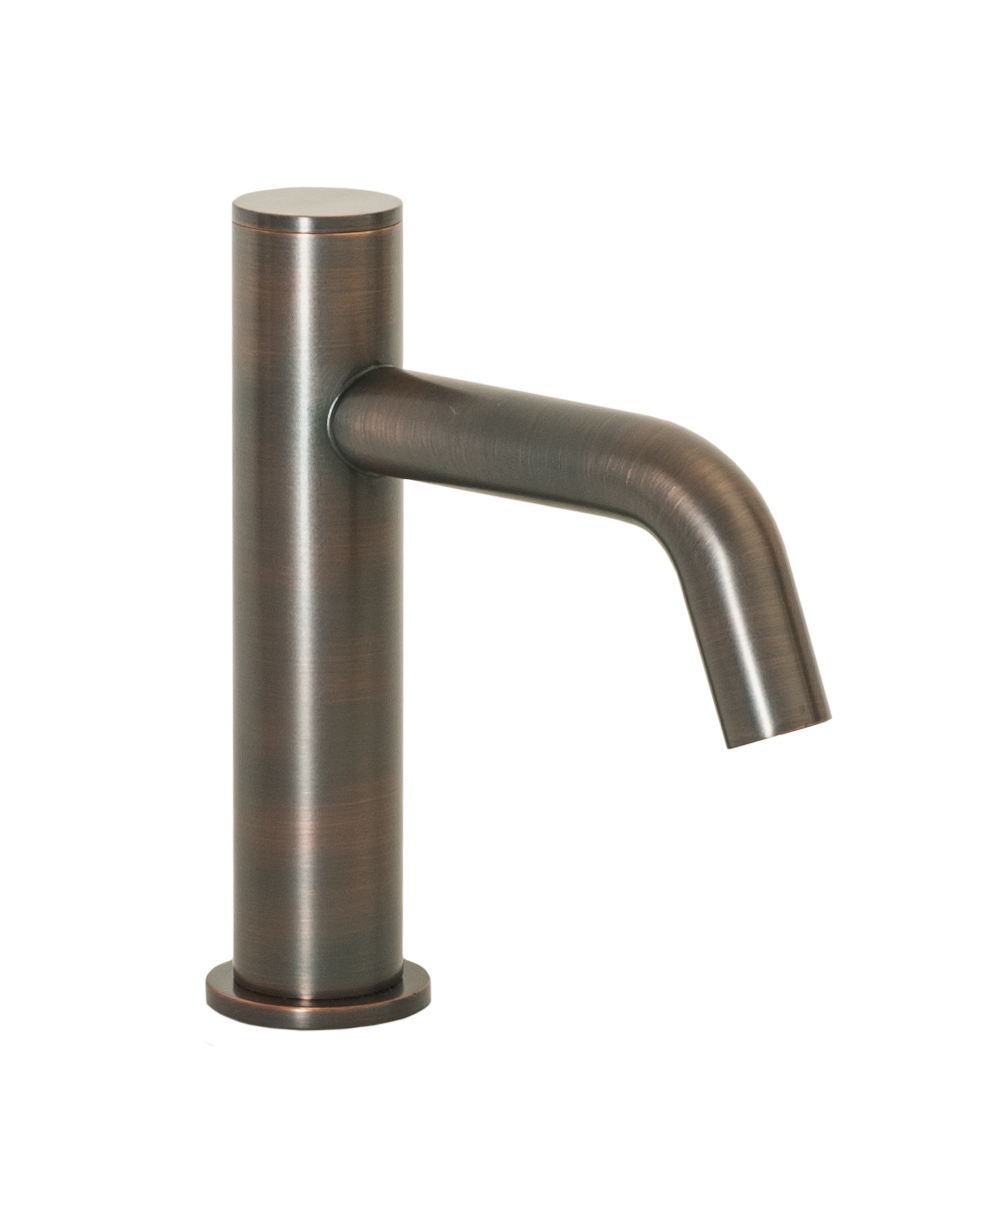 FA-3260 Automatic Faucet with 6” Spout Reach in Venetian Bronze